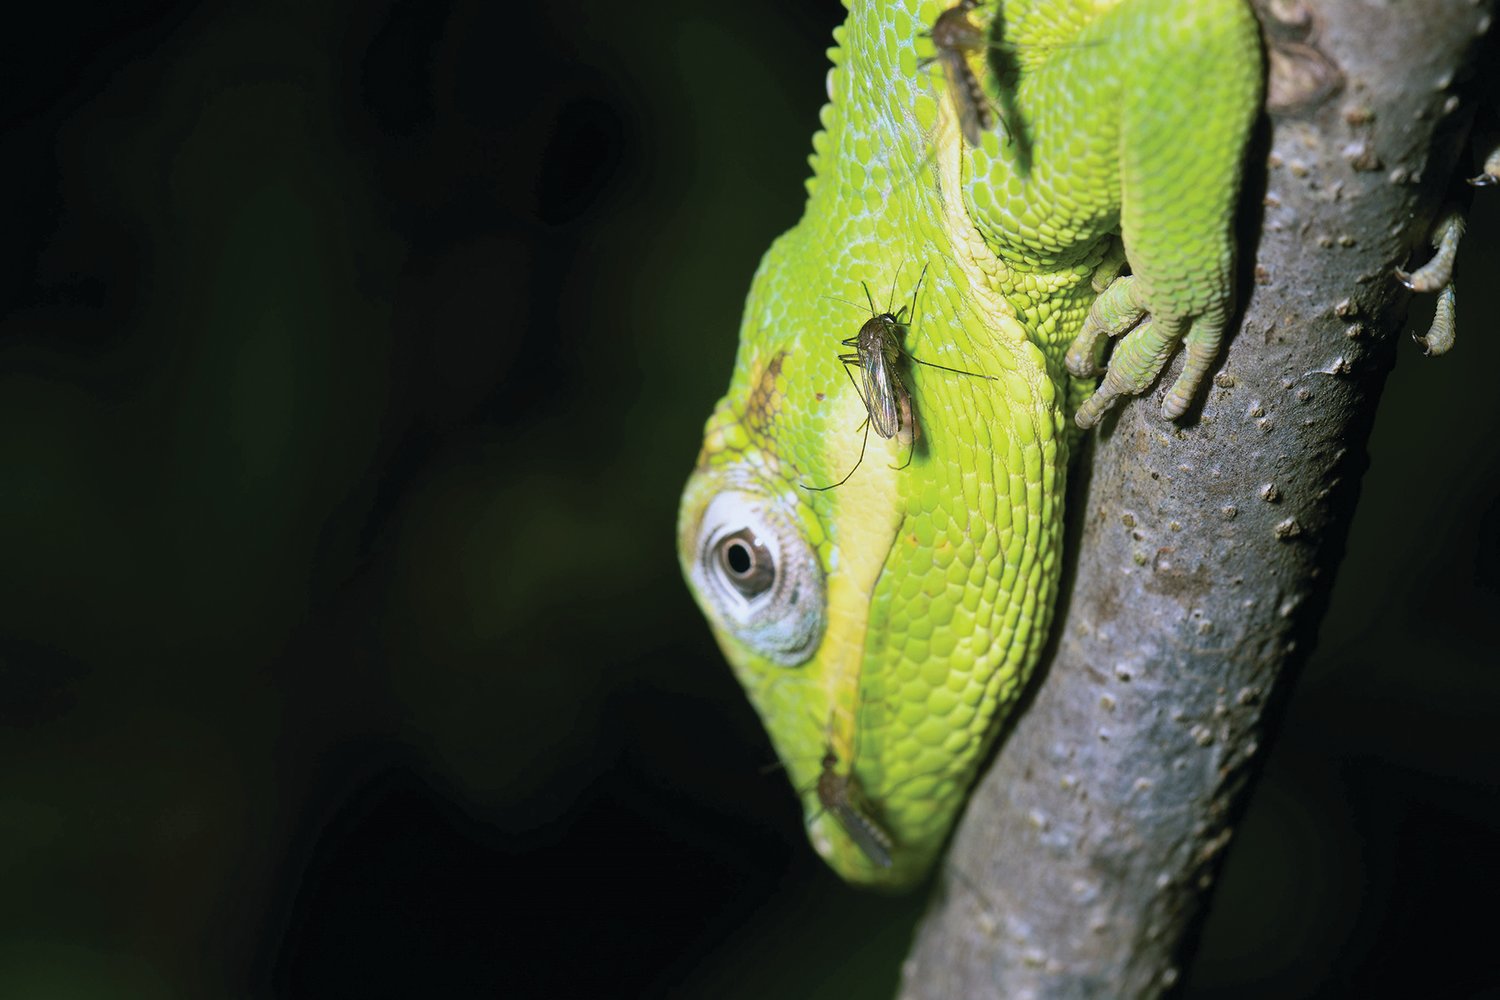 Lizards might help reduce the transmission of WNV and SLEV to birds and humans.